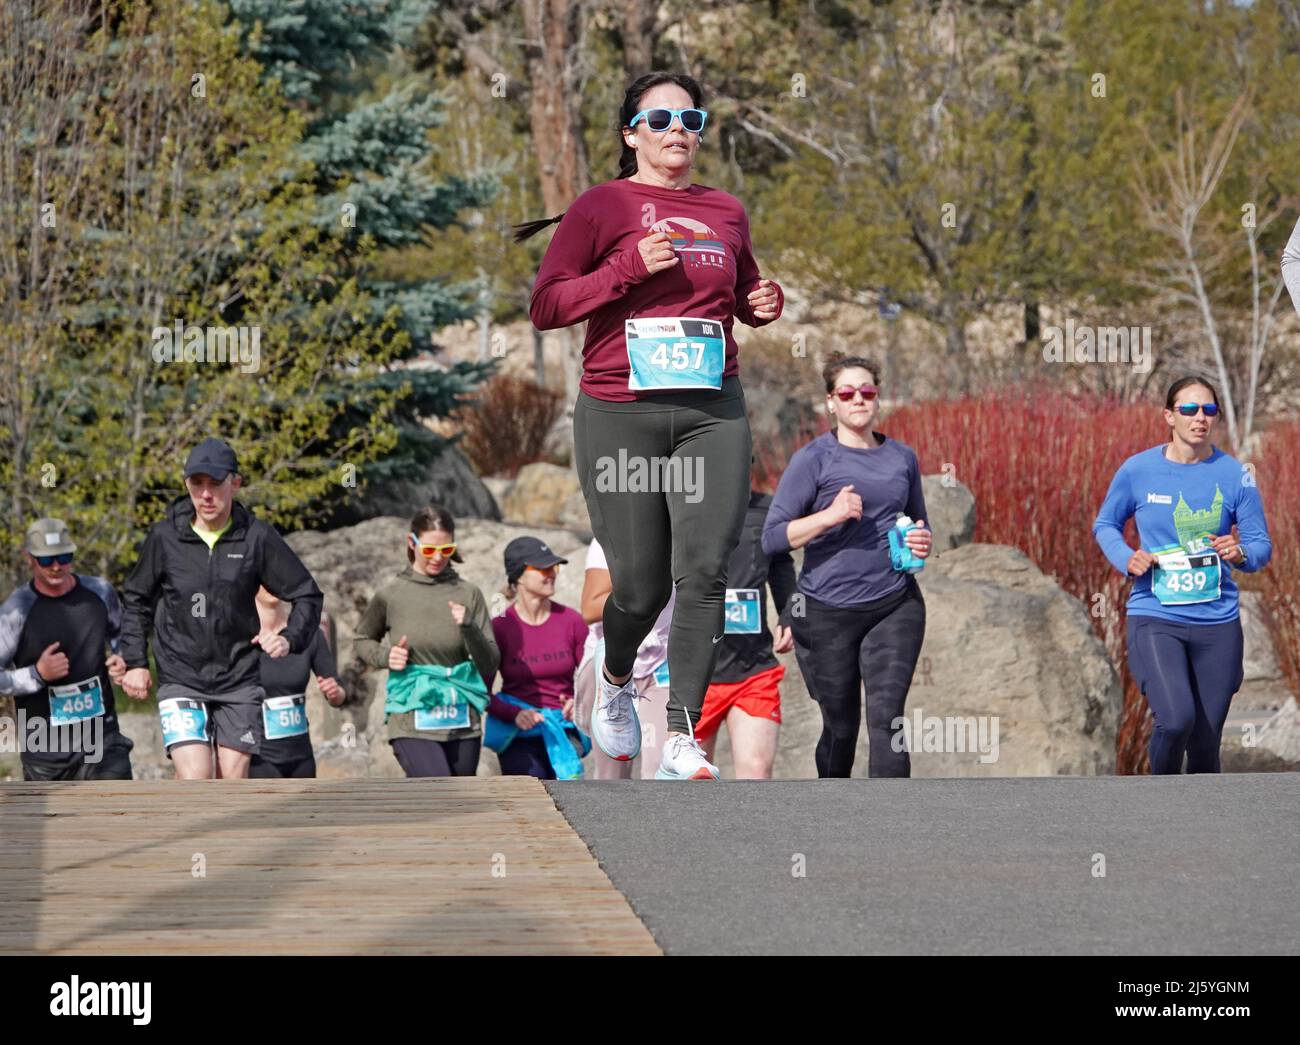 Runners in the annual Salmon Run, a charity event held each spring in the Old Mill District of Bend, Oregon. Stock Photo